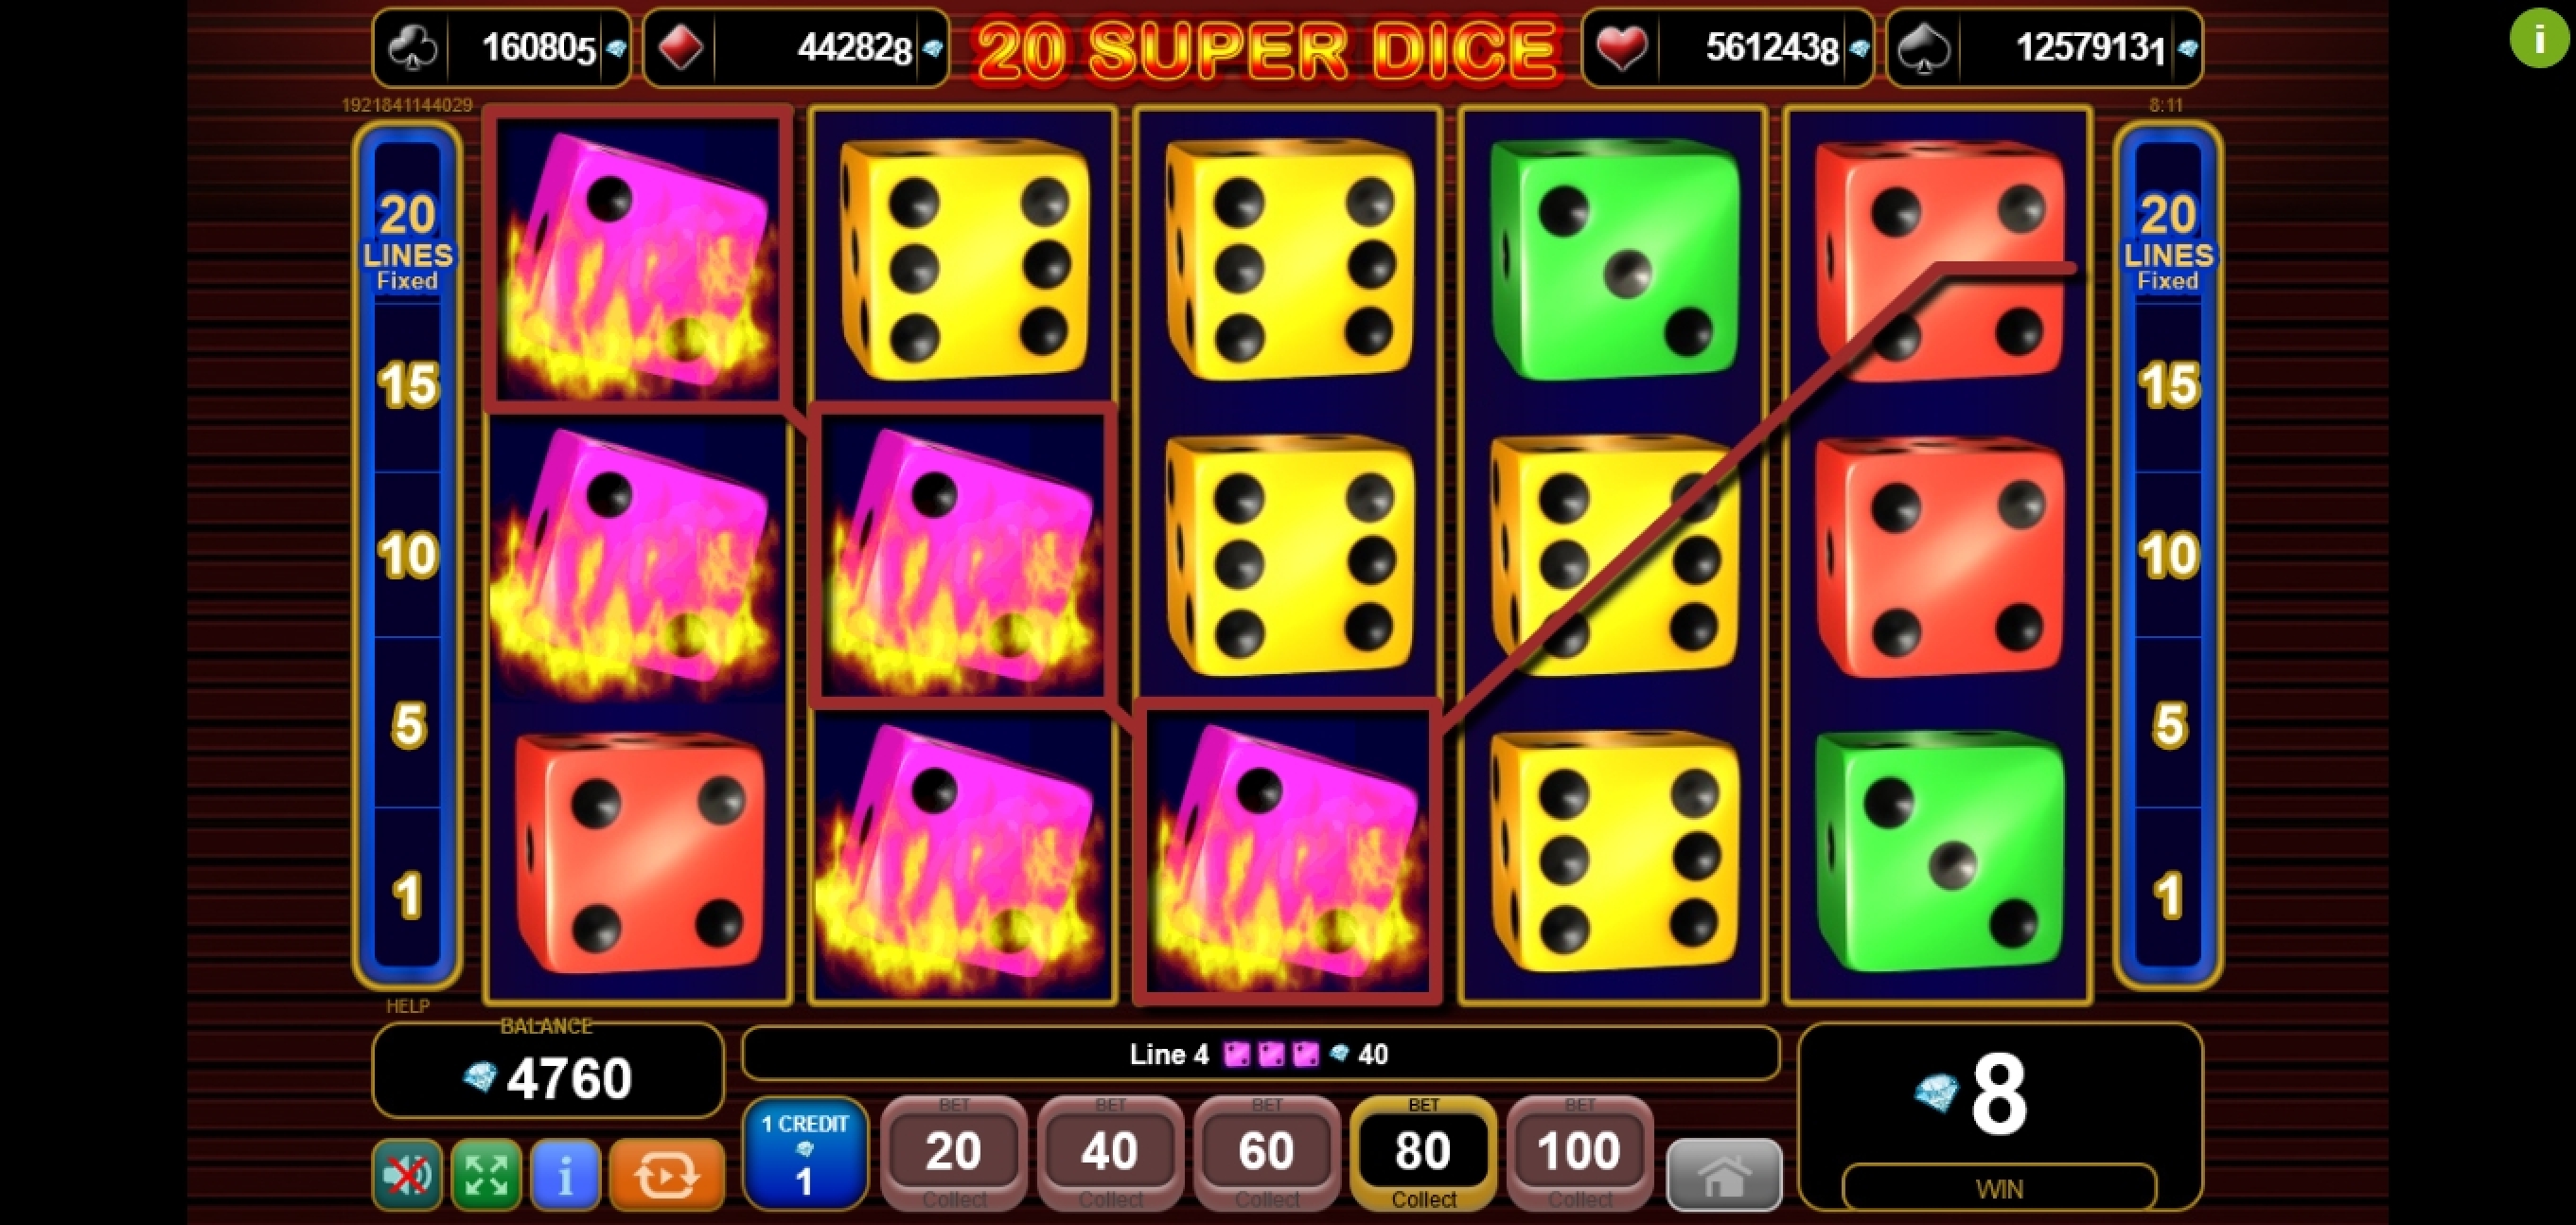 Win Money in 20 Super Dice Free Slot Game by EGT